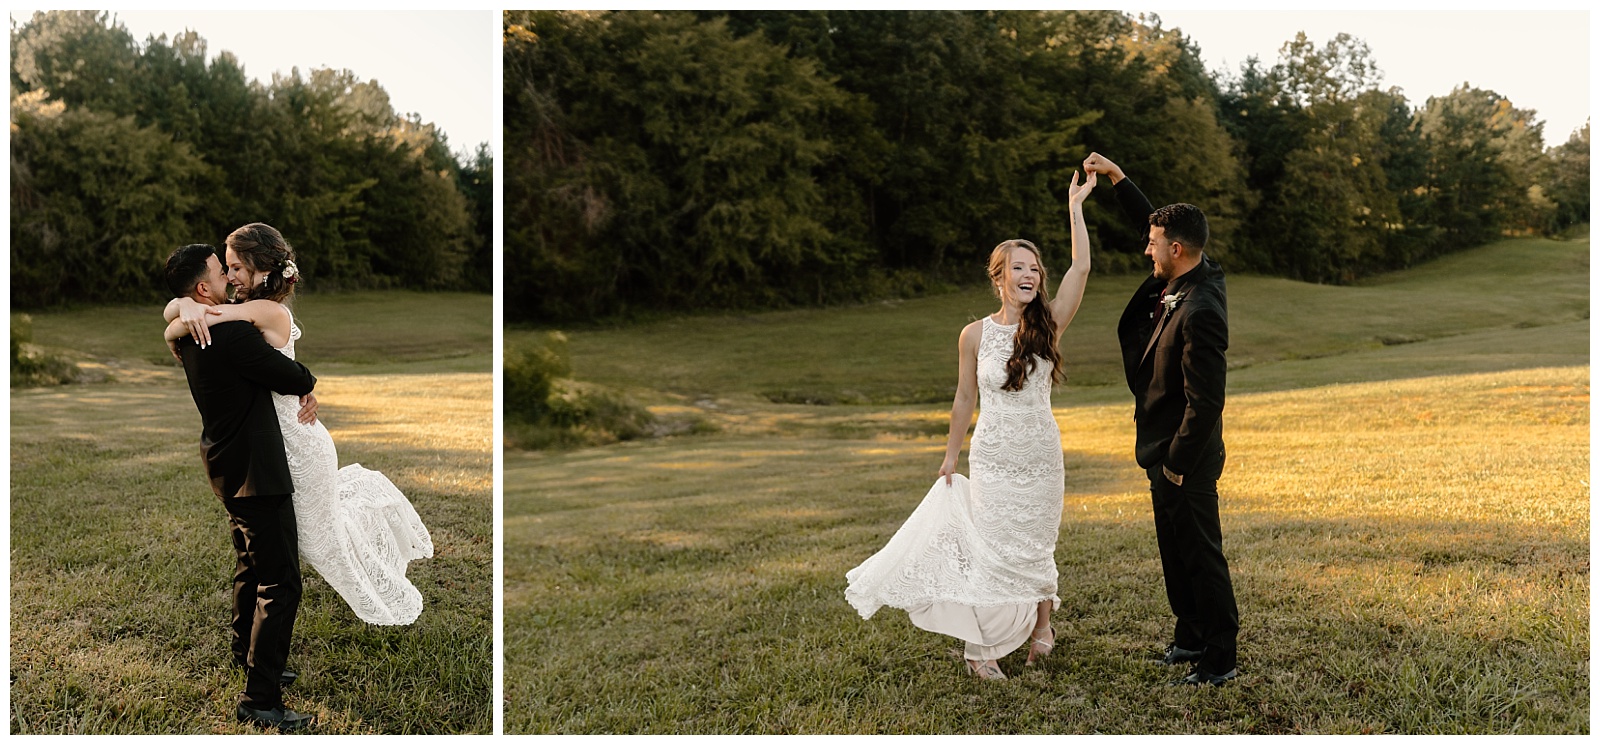 Portrait series of groom spinning bride around, twirling her, and holding her.